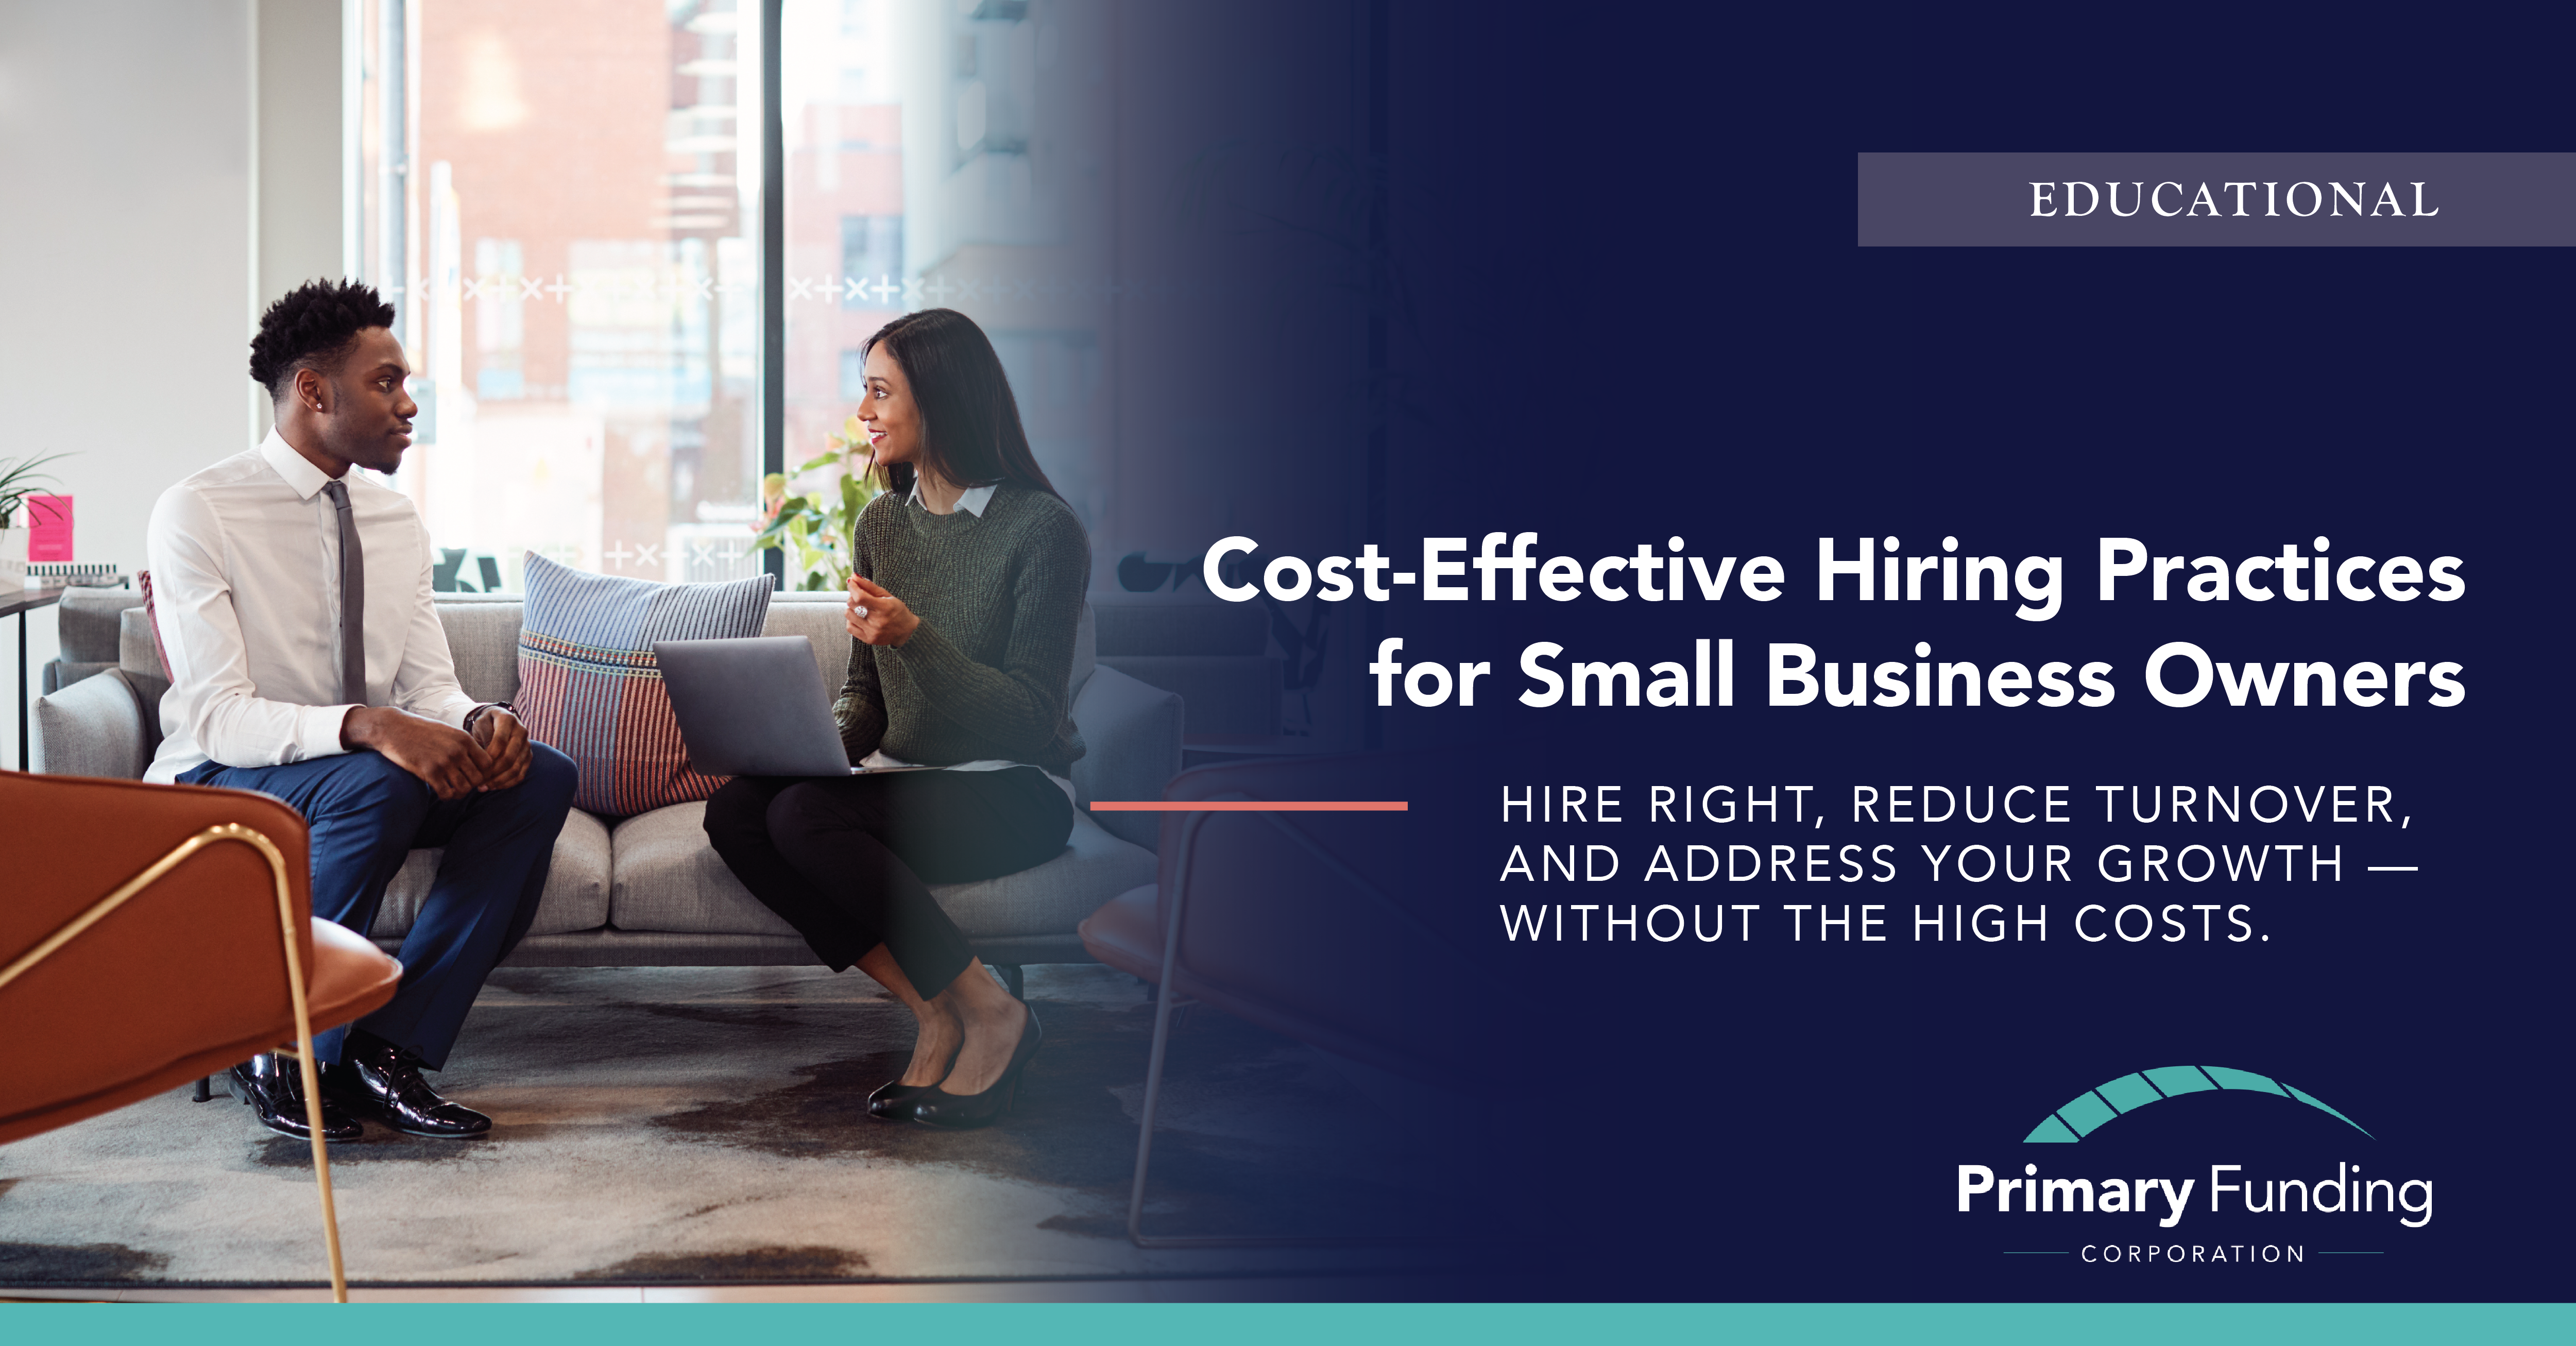 Cost-Effective Hiring Practices for Small Business Owners post image